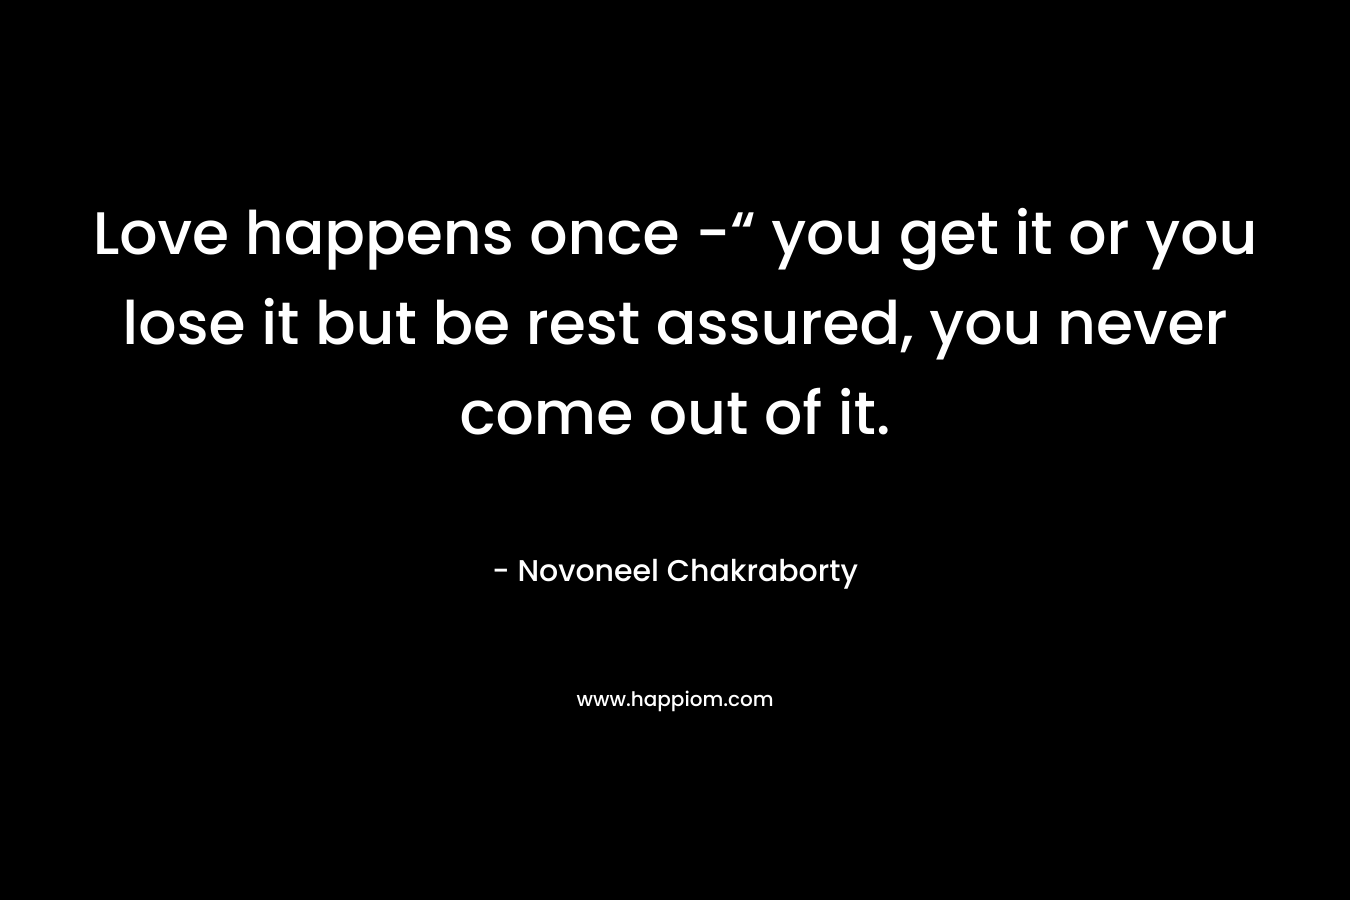 Love happens once -“ you get it or you lose it but be rest assured, you never come out of it. – Novoneel Chakraborty